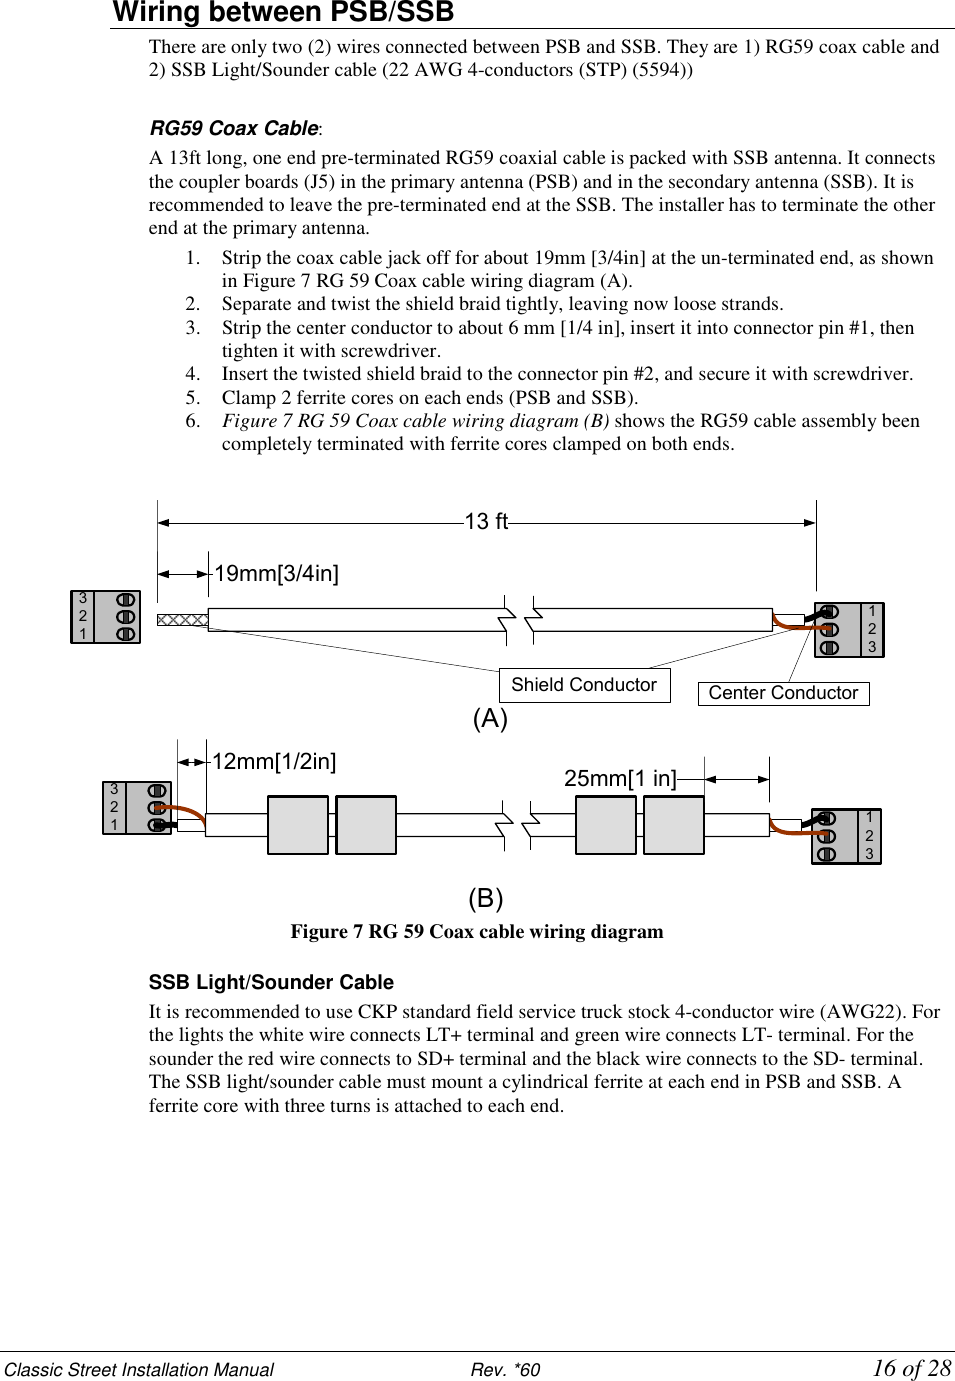 Classic Street Installation Manual                           Rev. *60           16 of 28 Wiring between PSB/SSB There are only two (2) wires connected between PSB and SSB. They are 1) RG59 coax cable and 2) SSB Light/Sounder cable (22 AWG 4-conductors (STP) (5594))  RG59 Coax Cable:  A 13ft long, one end pre-terminated RG59 coaxial cable is packed with SSB antenna. It connects the coupler boards (J5) in the primary antenna (PSB) and in the secondary antenna (SSB). It is recommended to leave the pre-terminated end at the SSB. The installer has to terminate the other end at the primary antenna.  1. Strip the coax cable jack off for about 19mm [3/4in] at the un-terminated end, as shown in Figure 7 RG 59 Coax cable wiring diagram (A). 2. Separate and twist the shield braid tightly, leaving now loose strands. 3. Strip the center conductor to about 6 mm [1/4 in], insert it into connector pin #1, then tighten it with screwdriver. 4. Insert the twisted shield braid to the connector pin #2, and secure it with screwdriver. 5. Clamp 2 ferrite cores on each ends (PSB and SSB). 6. Figure 7 RG 59 Coax cable wiring diagram (B) shows the RG59 cable assembly been completely terminated with ferrite cores clamped on both ends.  12312332113 ft19mm[3/4in]25mm[1 in]12mm[1/2in](A)(B)Center ConductorShield Conductor321 Figure 7 RG 59 Coax cable wiring diagram  SSB Light/Sounder Cable It is recommended to use CKP standard field service truck stock 4-conductor wire (AWG22). For the lights the white wire connects LT+ terminal and green wire connects LT- terminal. For the sounder the red wire connects to SD+ terminal and the black wire connects to the SD- terminal. The SSB light/sounder cable must mount a cylindrical ferrite at each end in PSB and SSB. A ferrite core with three turns is attached to each end.  